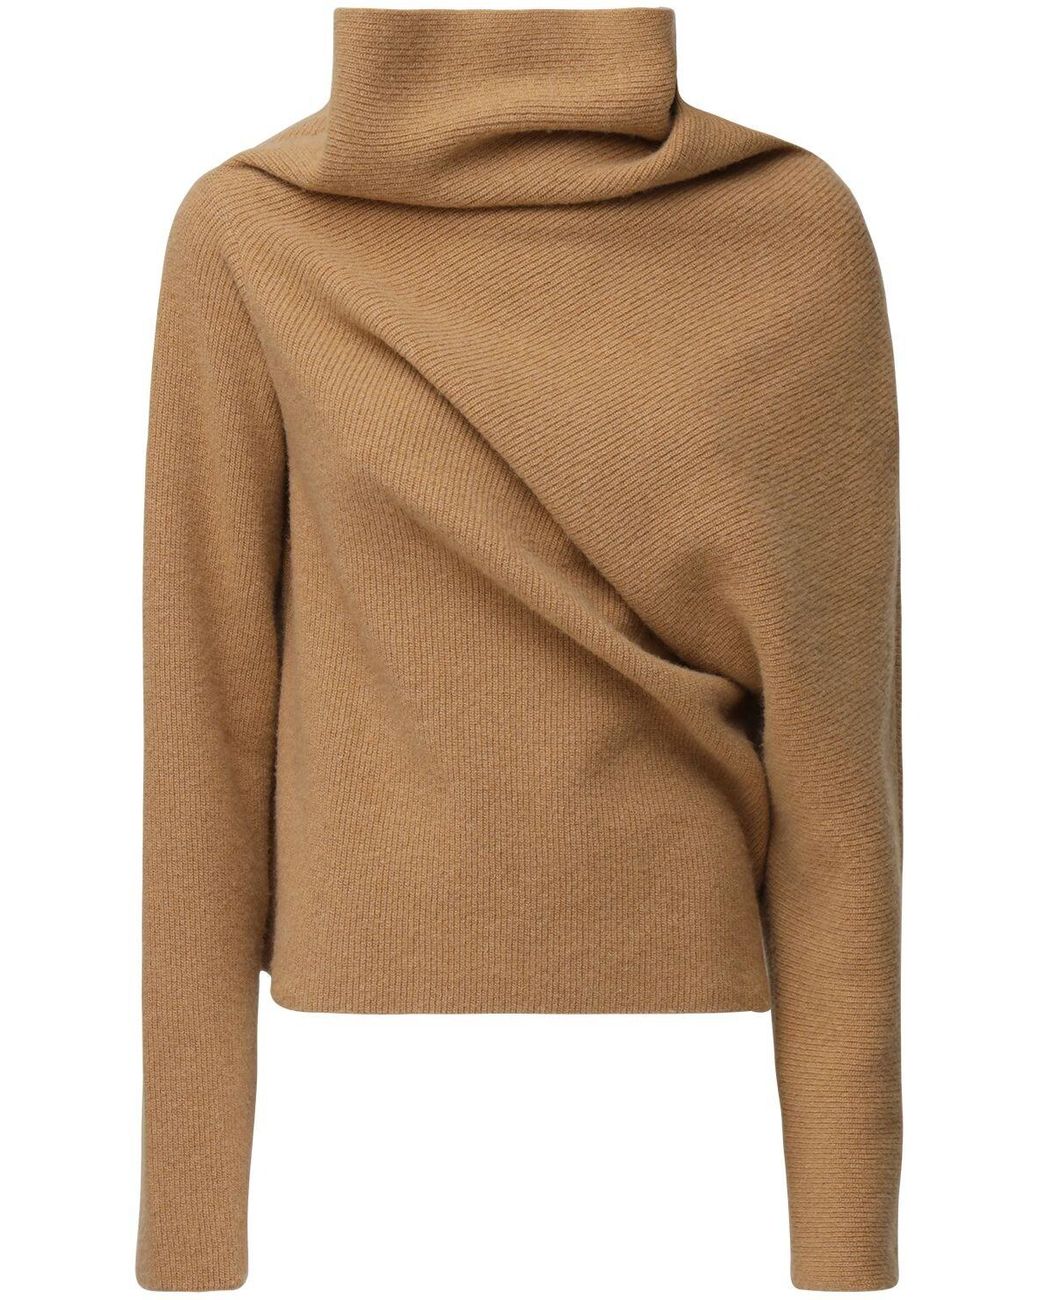 Colville Rib Knit Draped Turtleneck Wool Sweater in Camel (Natural) - Lyst